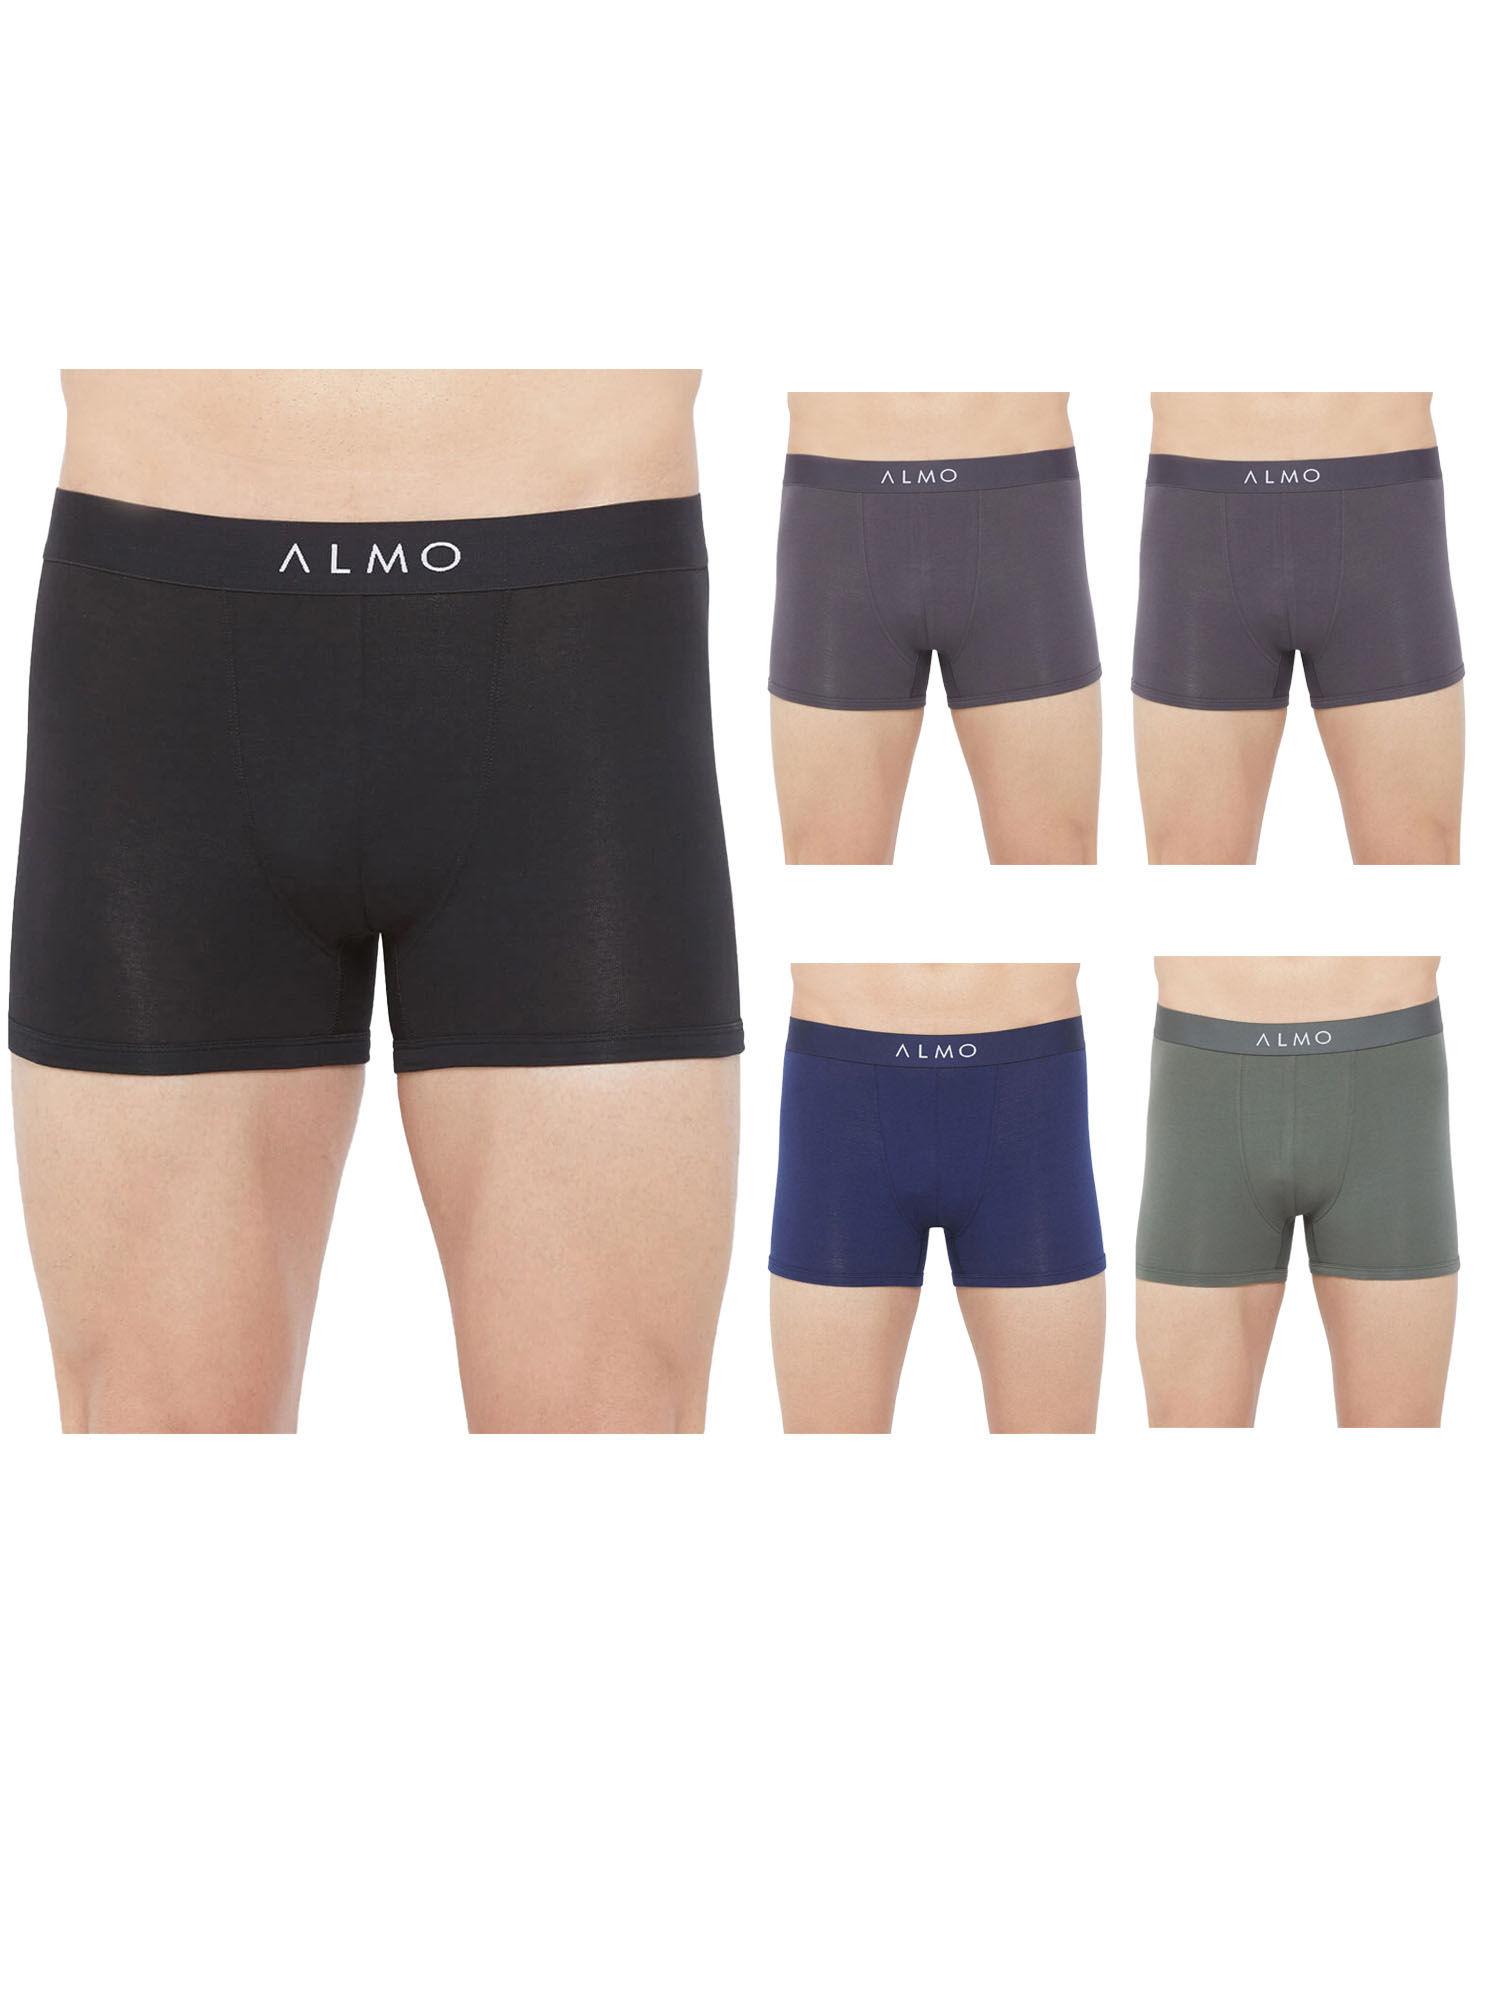 rico solid organic cotton trunk (pack of 5) - black - dark grey - navy - army green